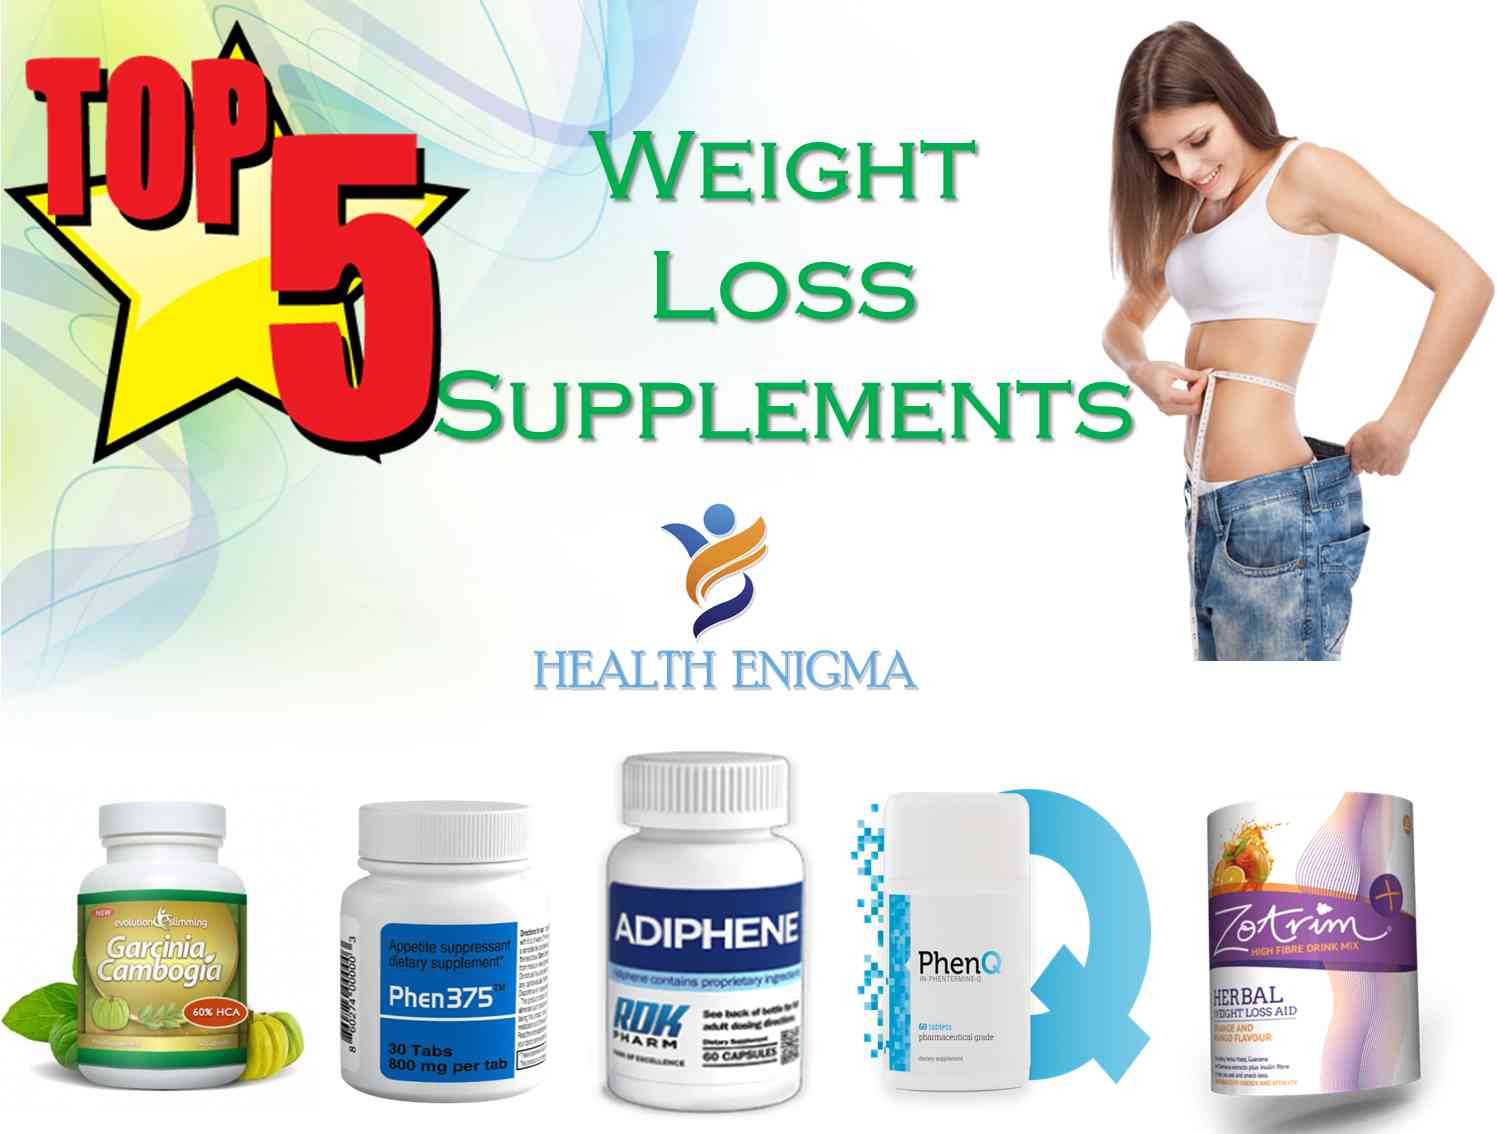 Top Weight Loss Supplements
 5 Reasons Why Summer is the Best Time to Lose Weight